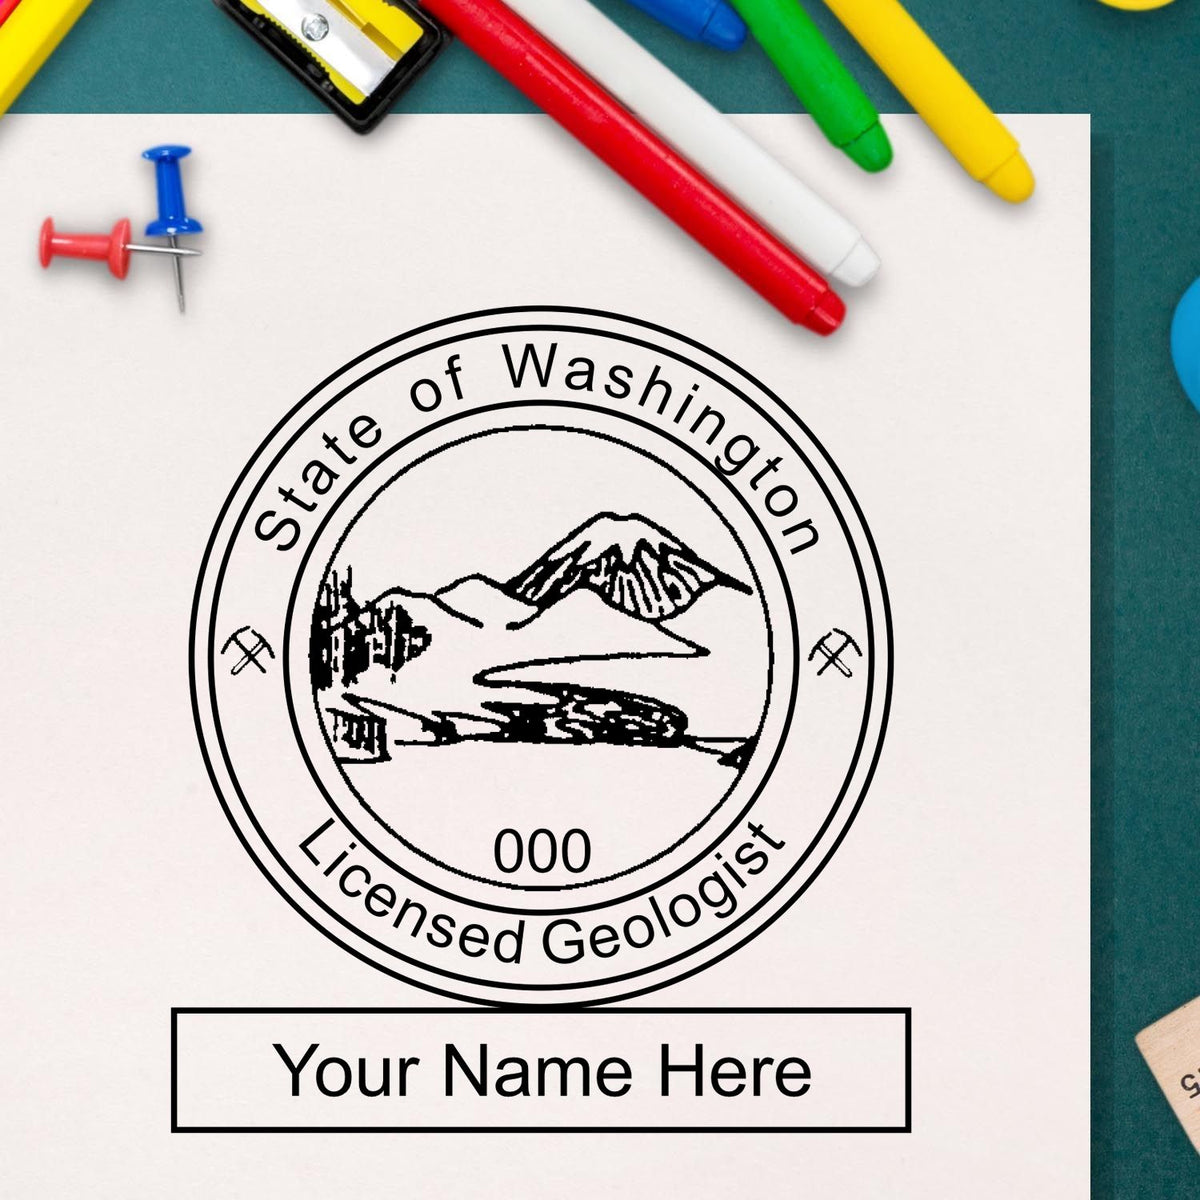 This paper is stamped with a sample imprint of the Premium MaxLight Pre-Inked Washington Geology Stamp, signifying its quality and reliability.